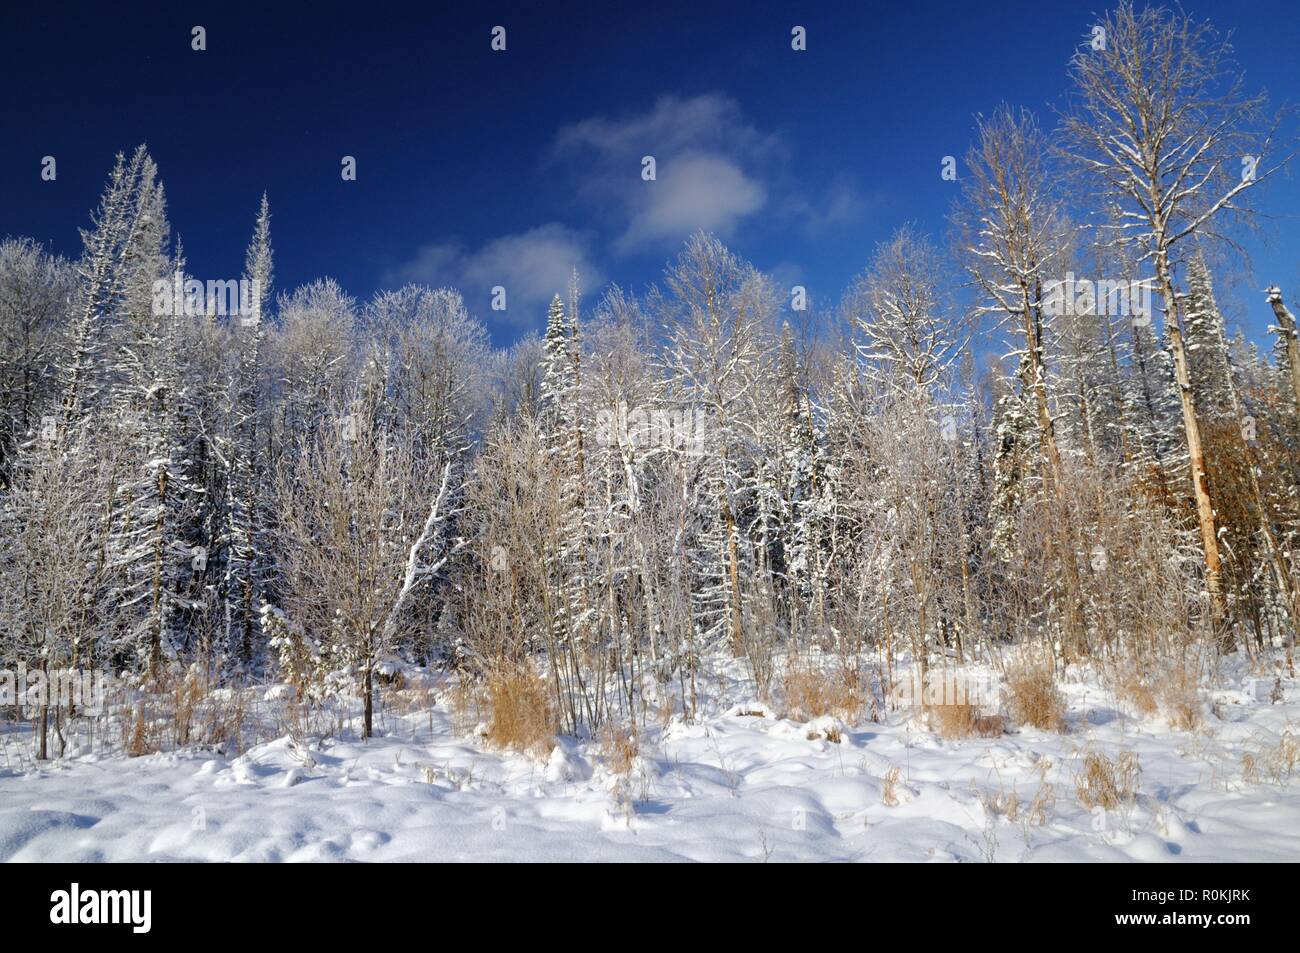 Winter landscape with snowy forest in winter under dark blue sky in Siberia, Russia Stock Photo